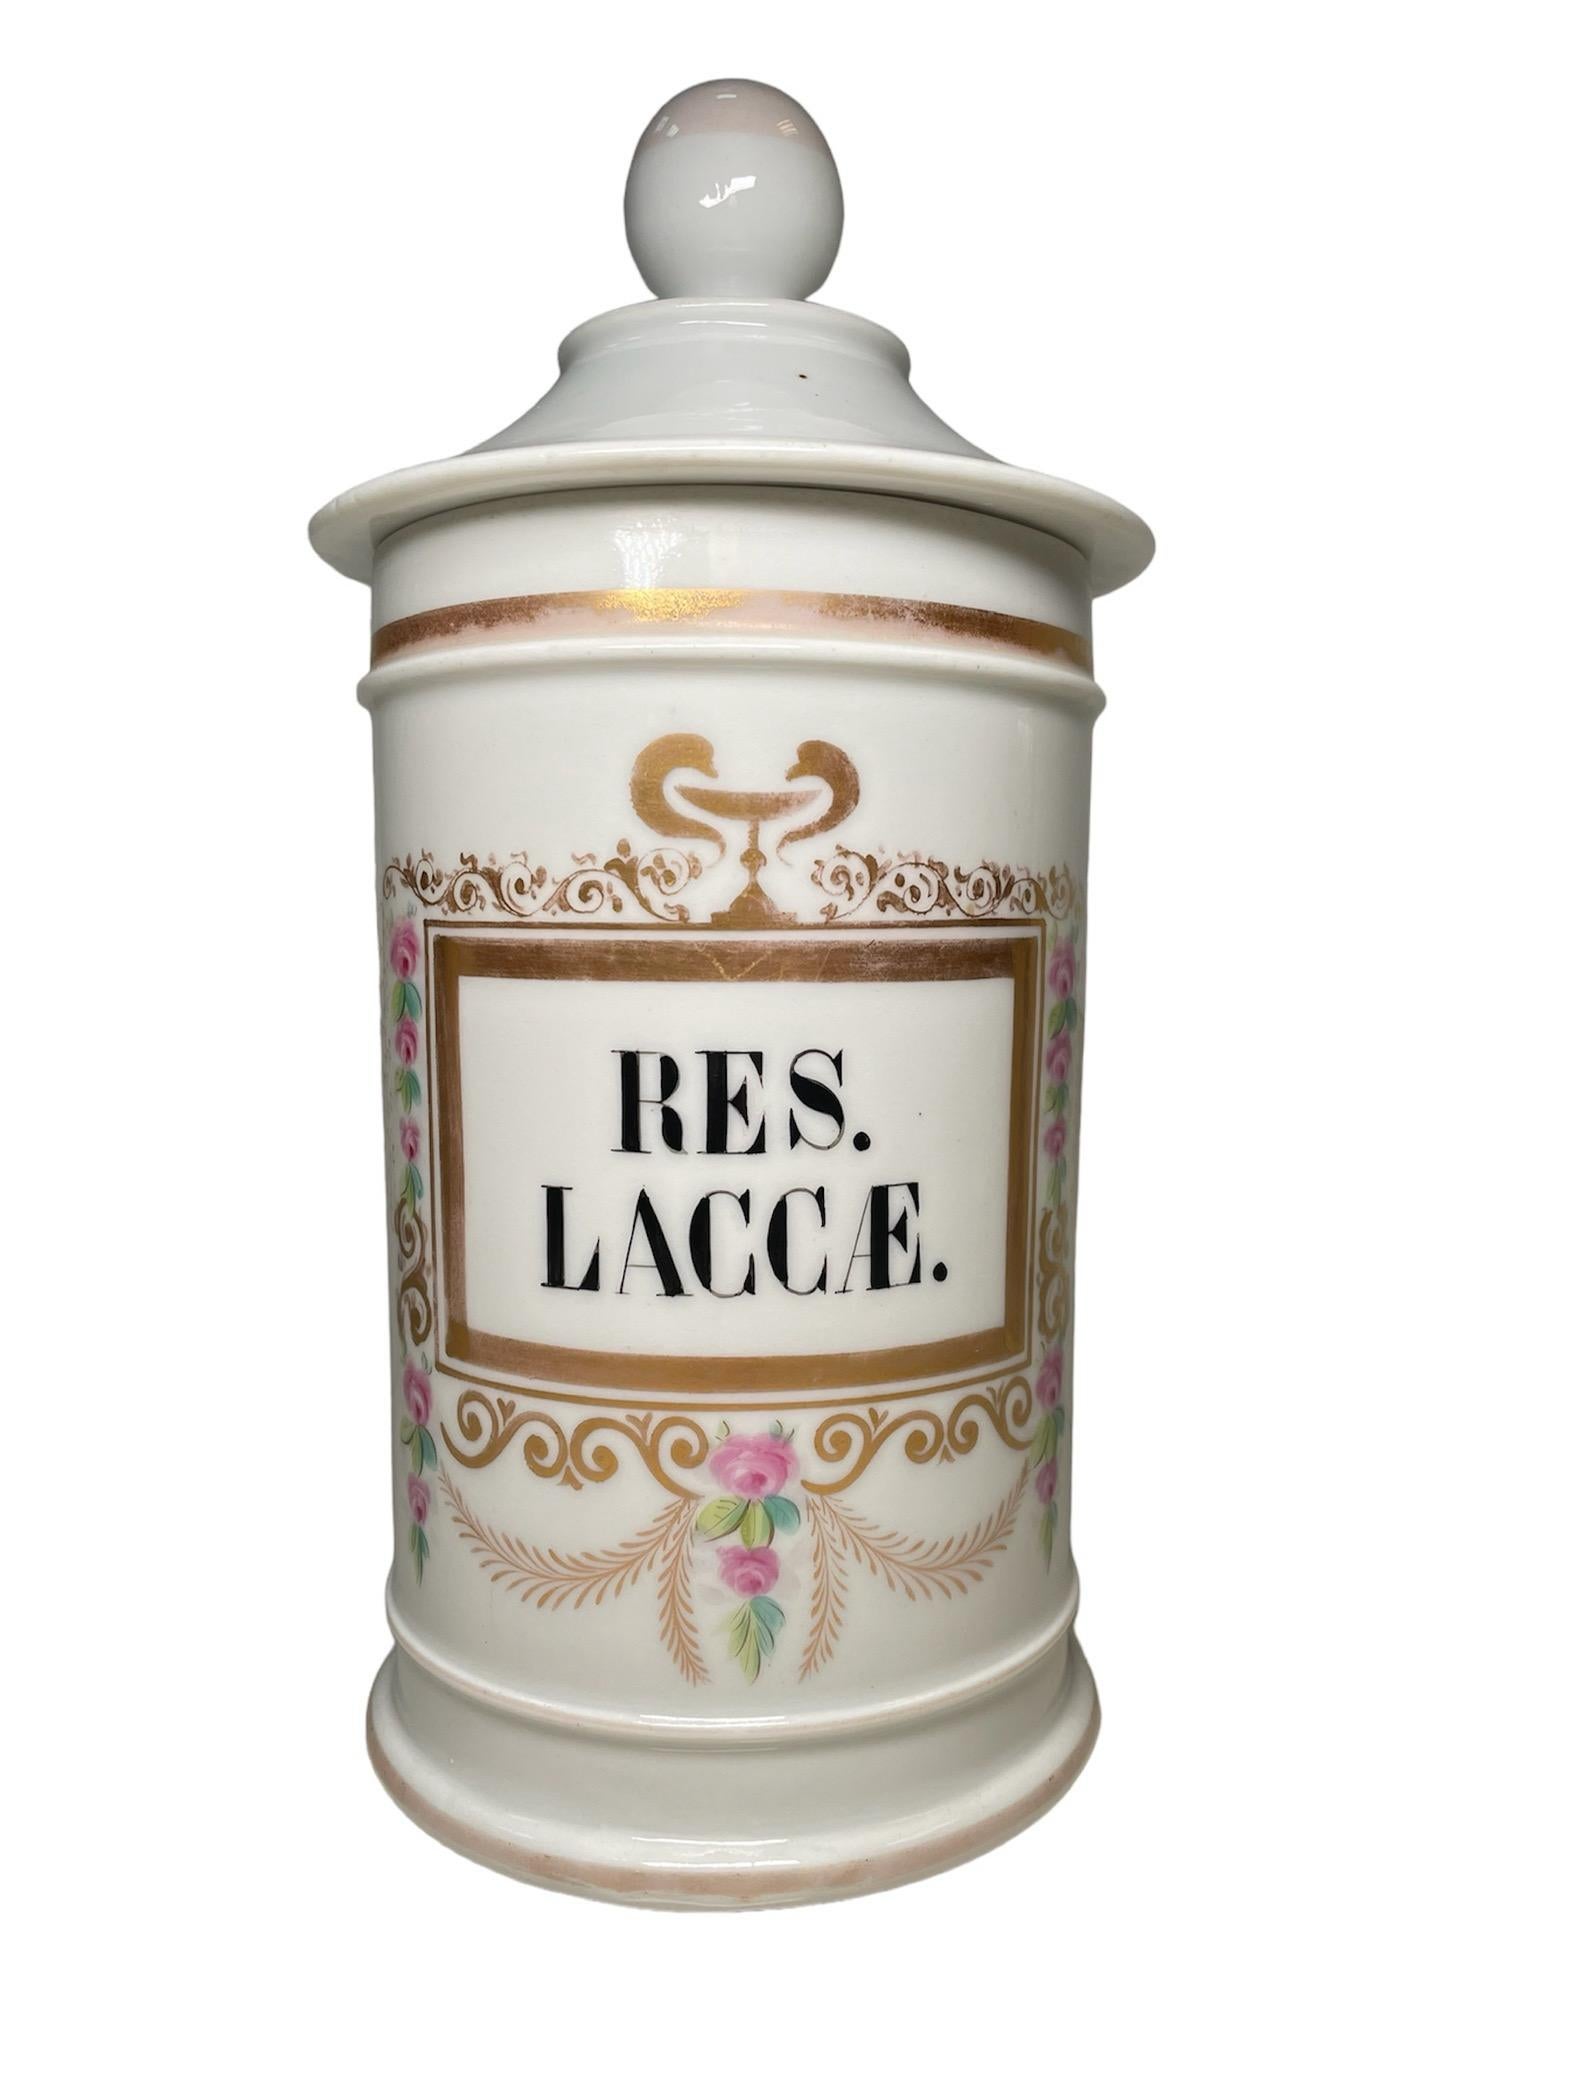 Neoclassical Revival Porcelain Apothecary Jar For Sale